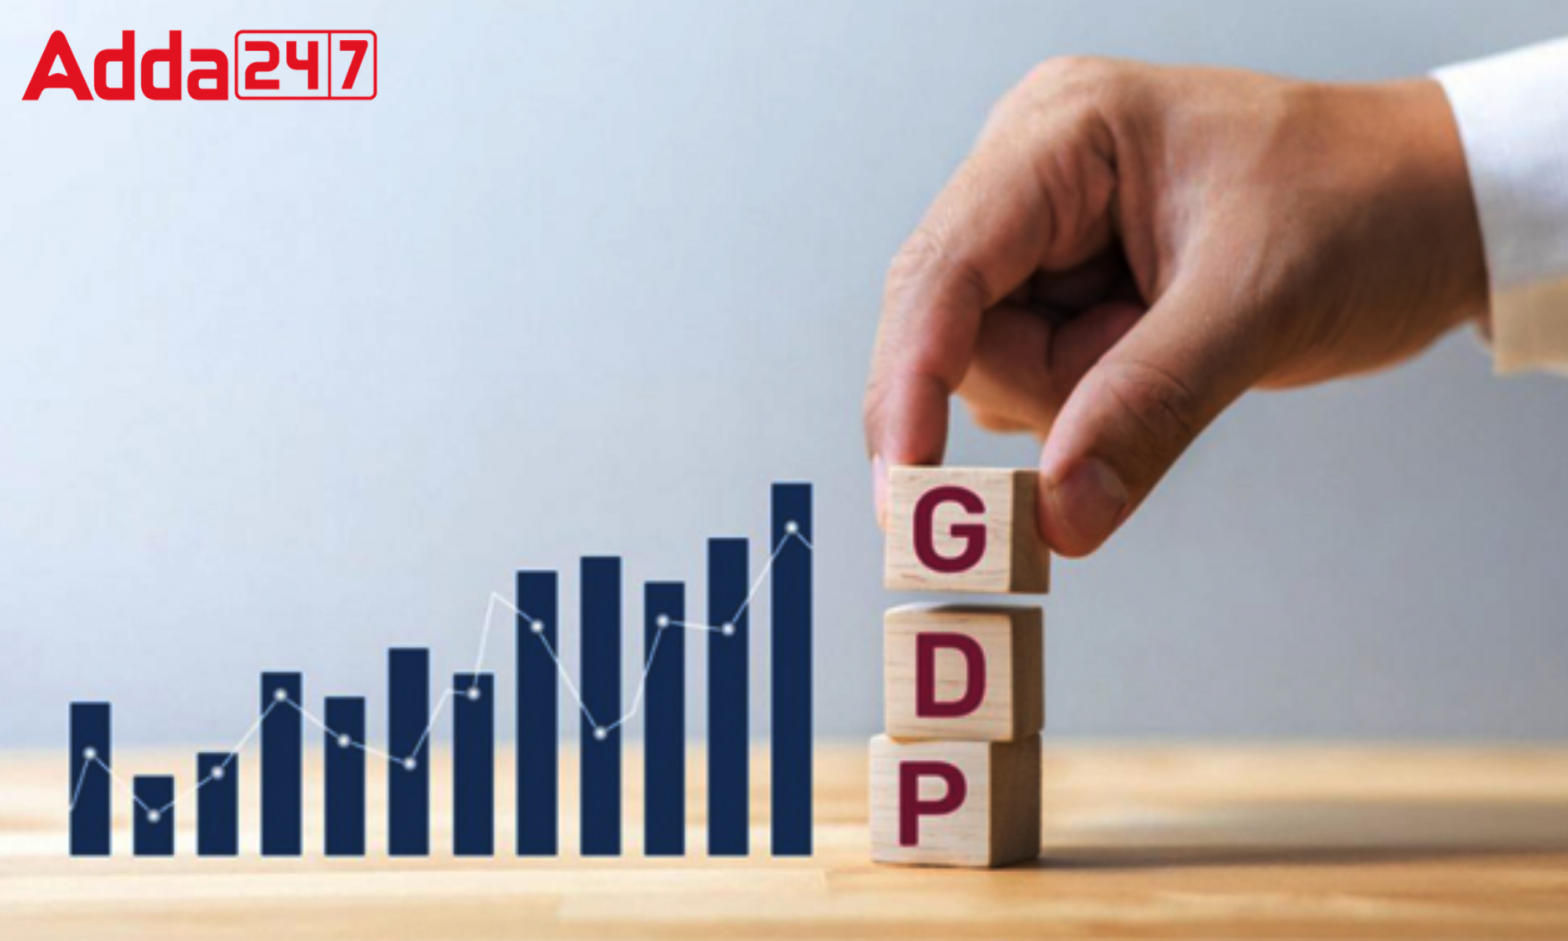 India's 2022 GDP growth prediction by Goldman Sachs